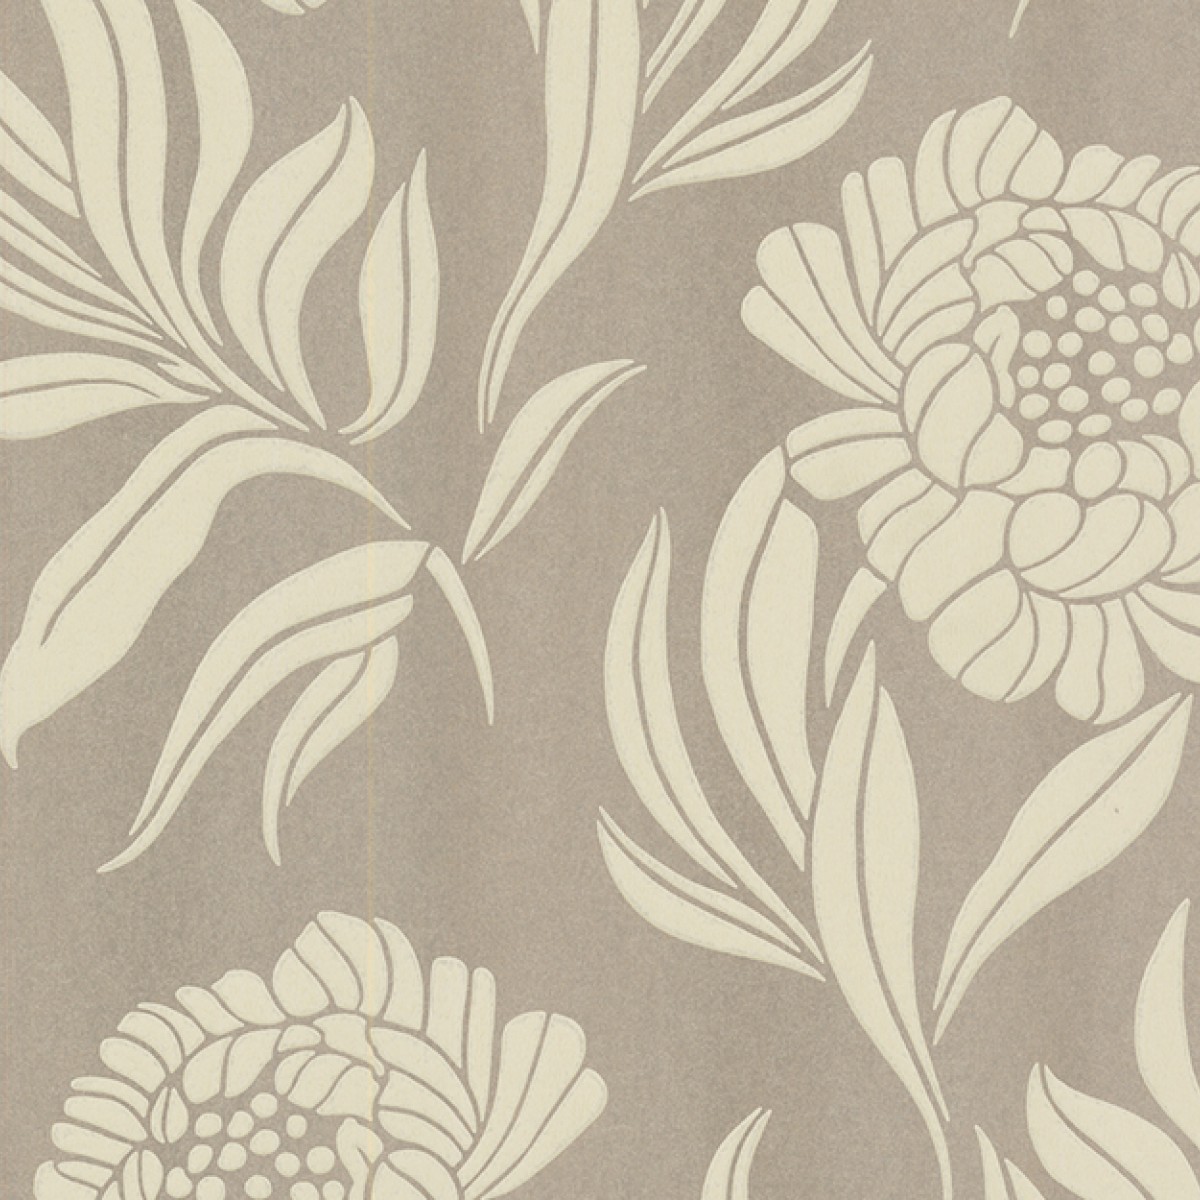 Tapet Chatsworth, Taupe Metallic Luxury Floral, 1838 Wallcoverings, 5.3mp / rola, Tapet living 